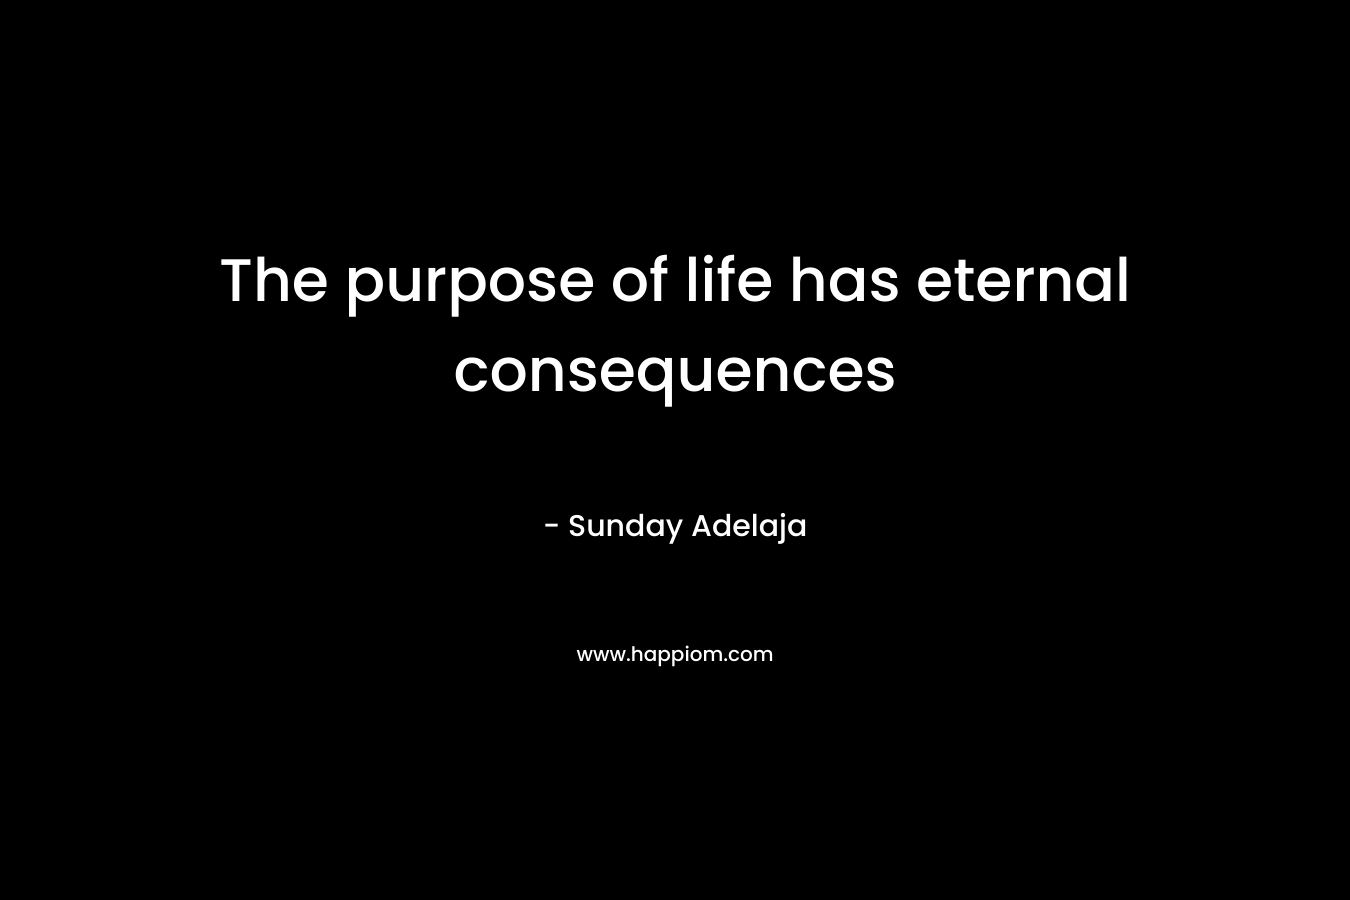 The purpose of life has eternal consequences